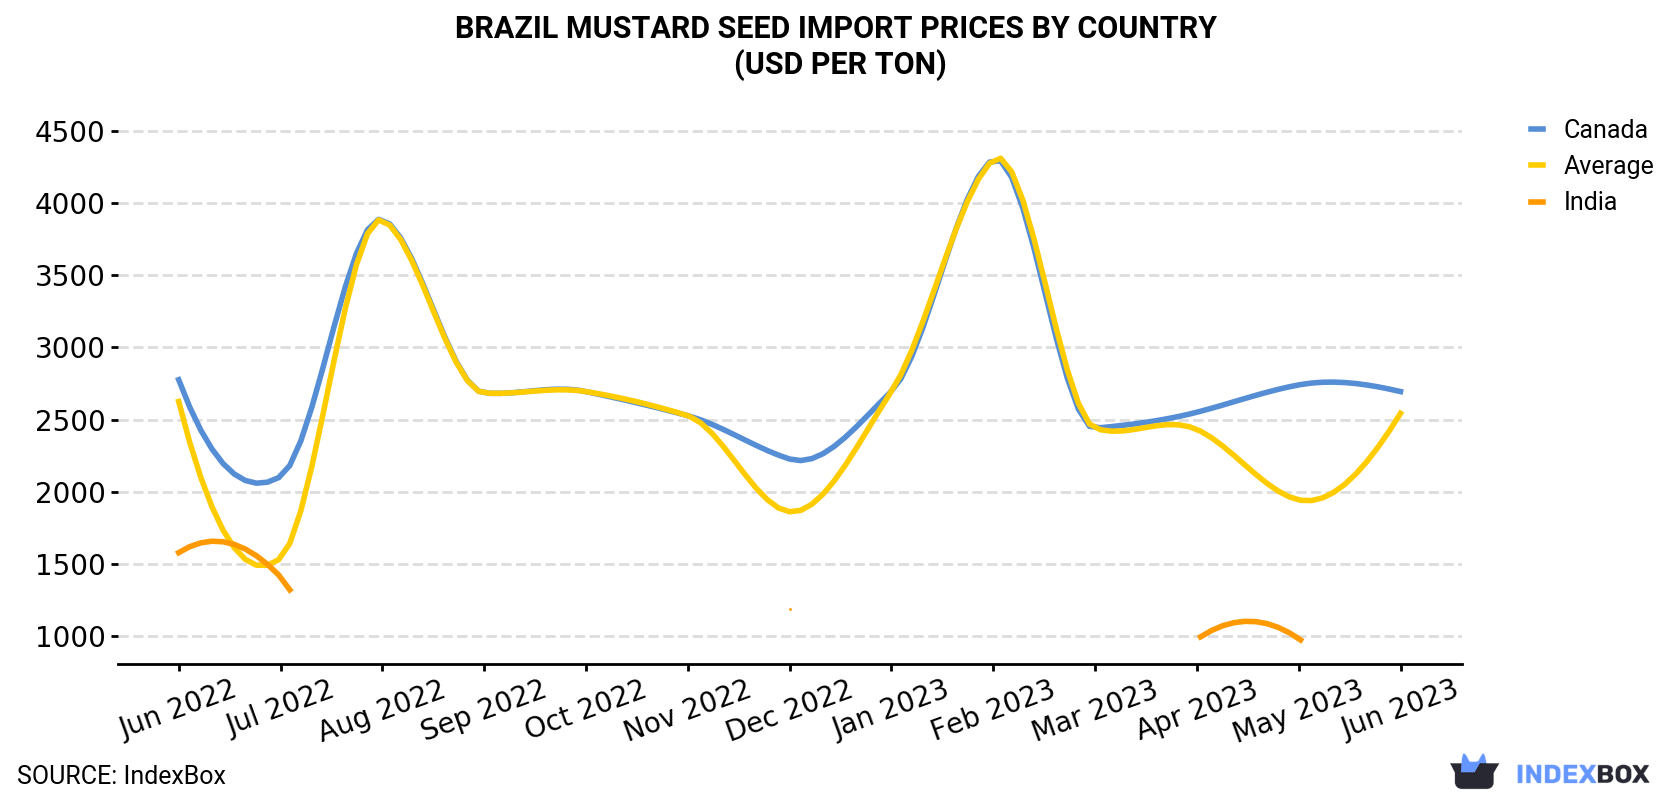 Brazil Mustard Seed Import Prices By Country (USD Per Ton)